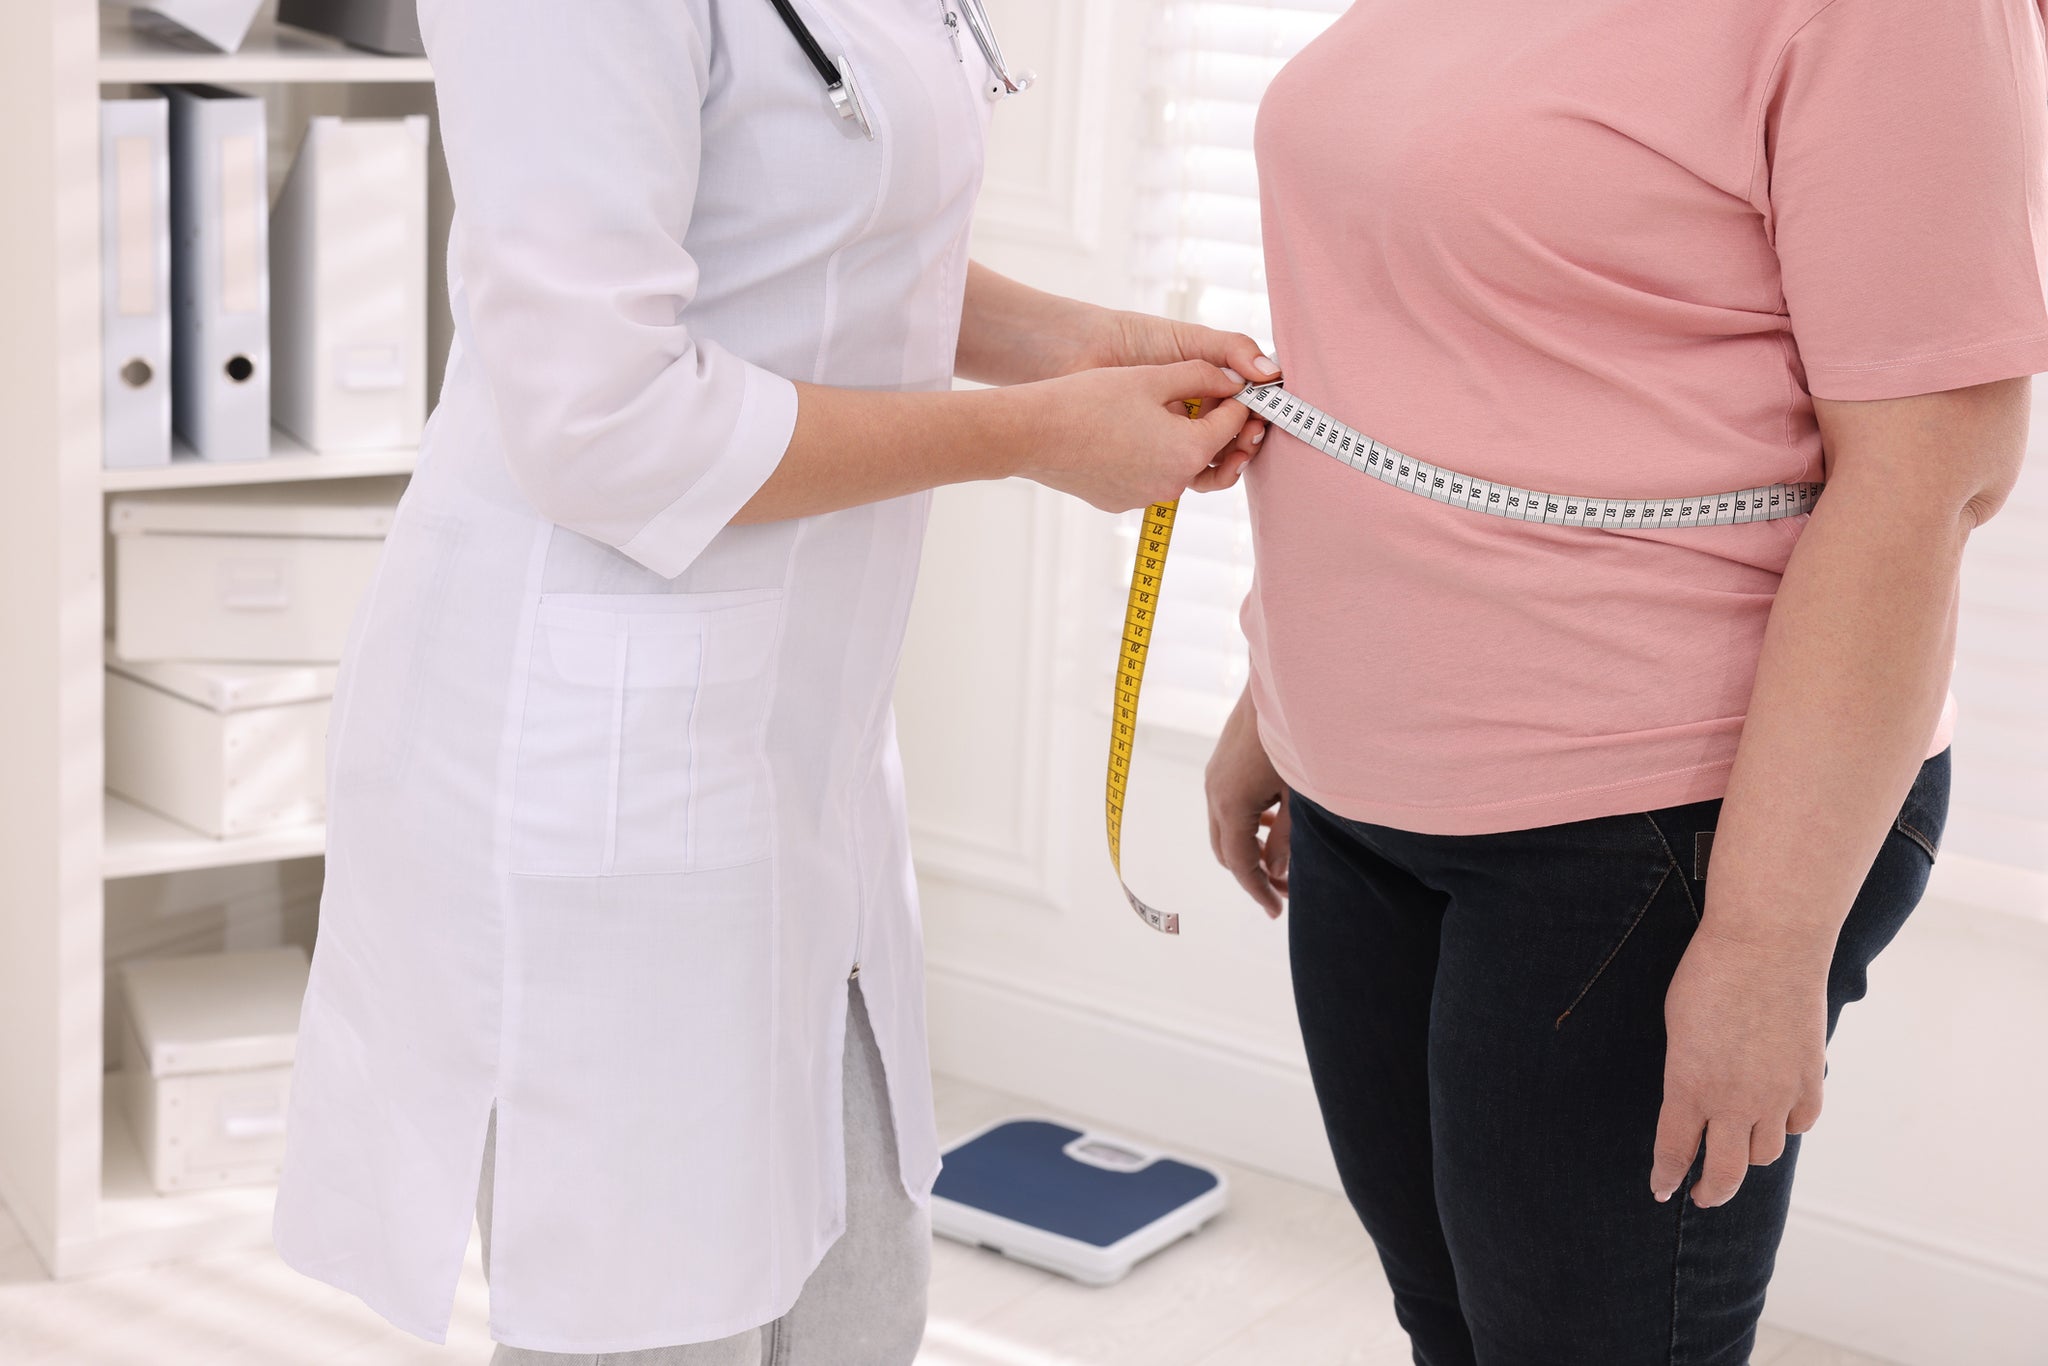 A doctor measures a patients weight loss.